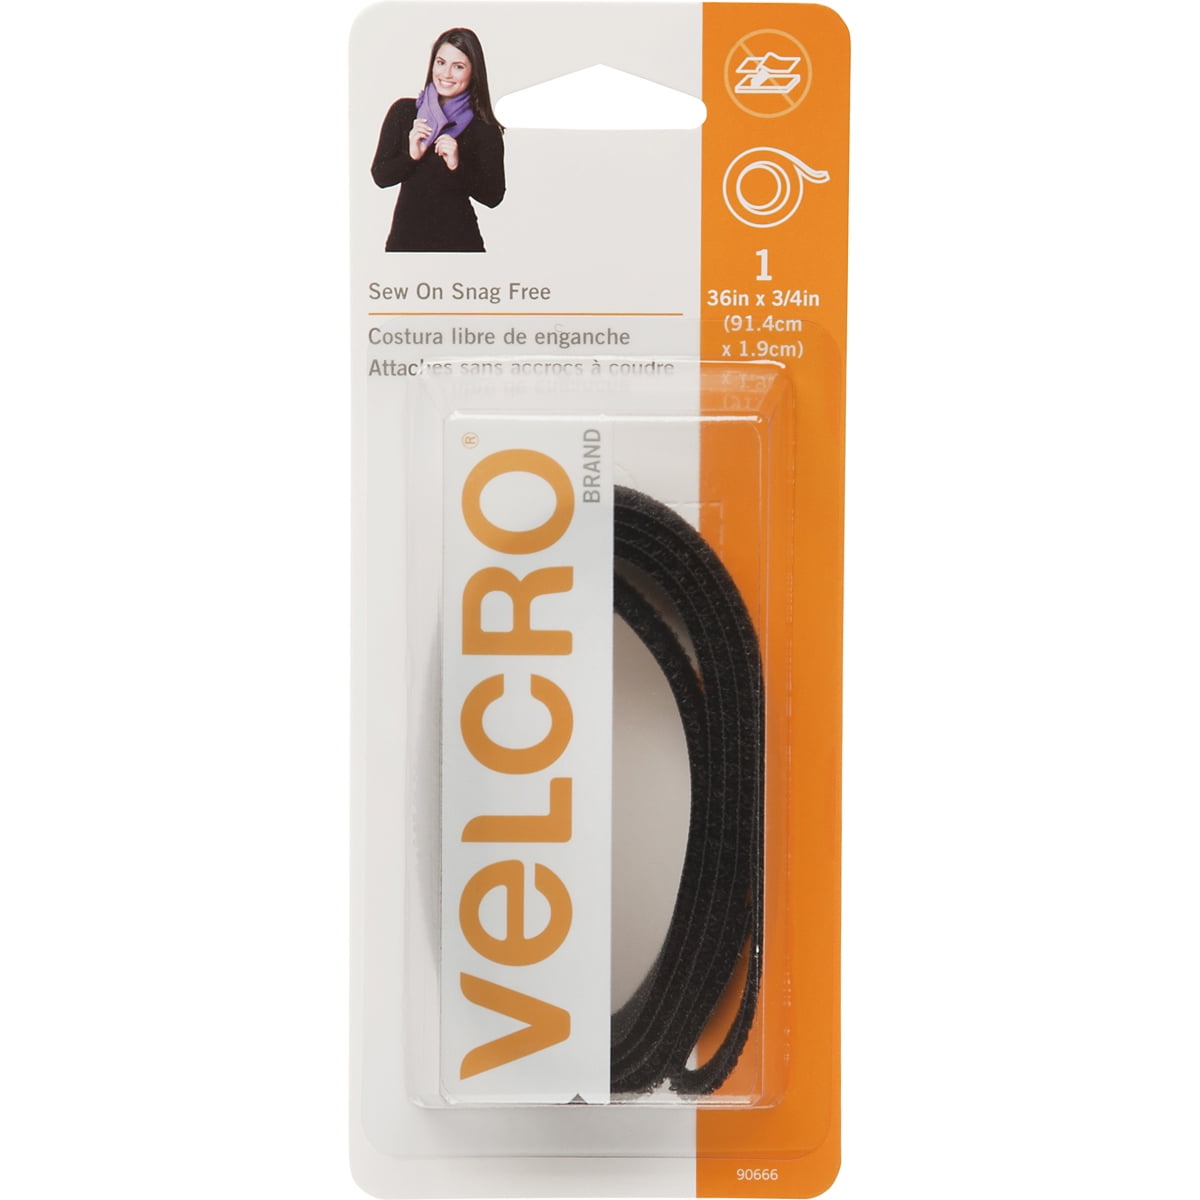 VELCRO Brand Sew On Strong Tape 30in x 1in. Black